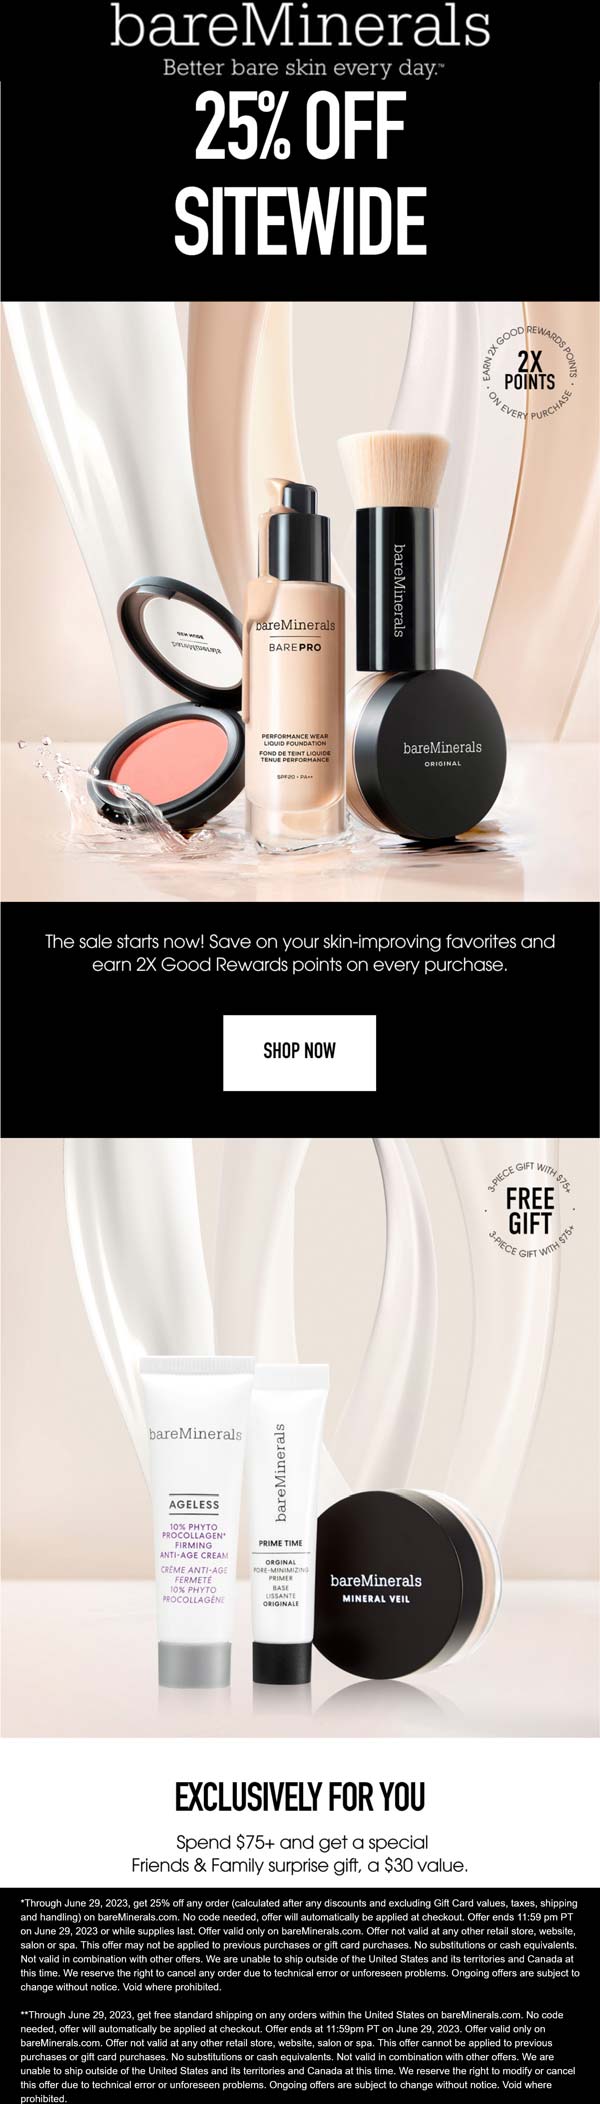 bareMinerals stores Coupon  25% off everything + free gift on $75 online at bareMinerals #bareminerals 